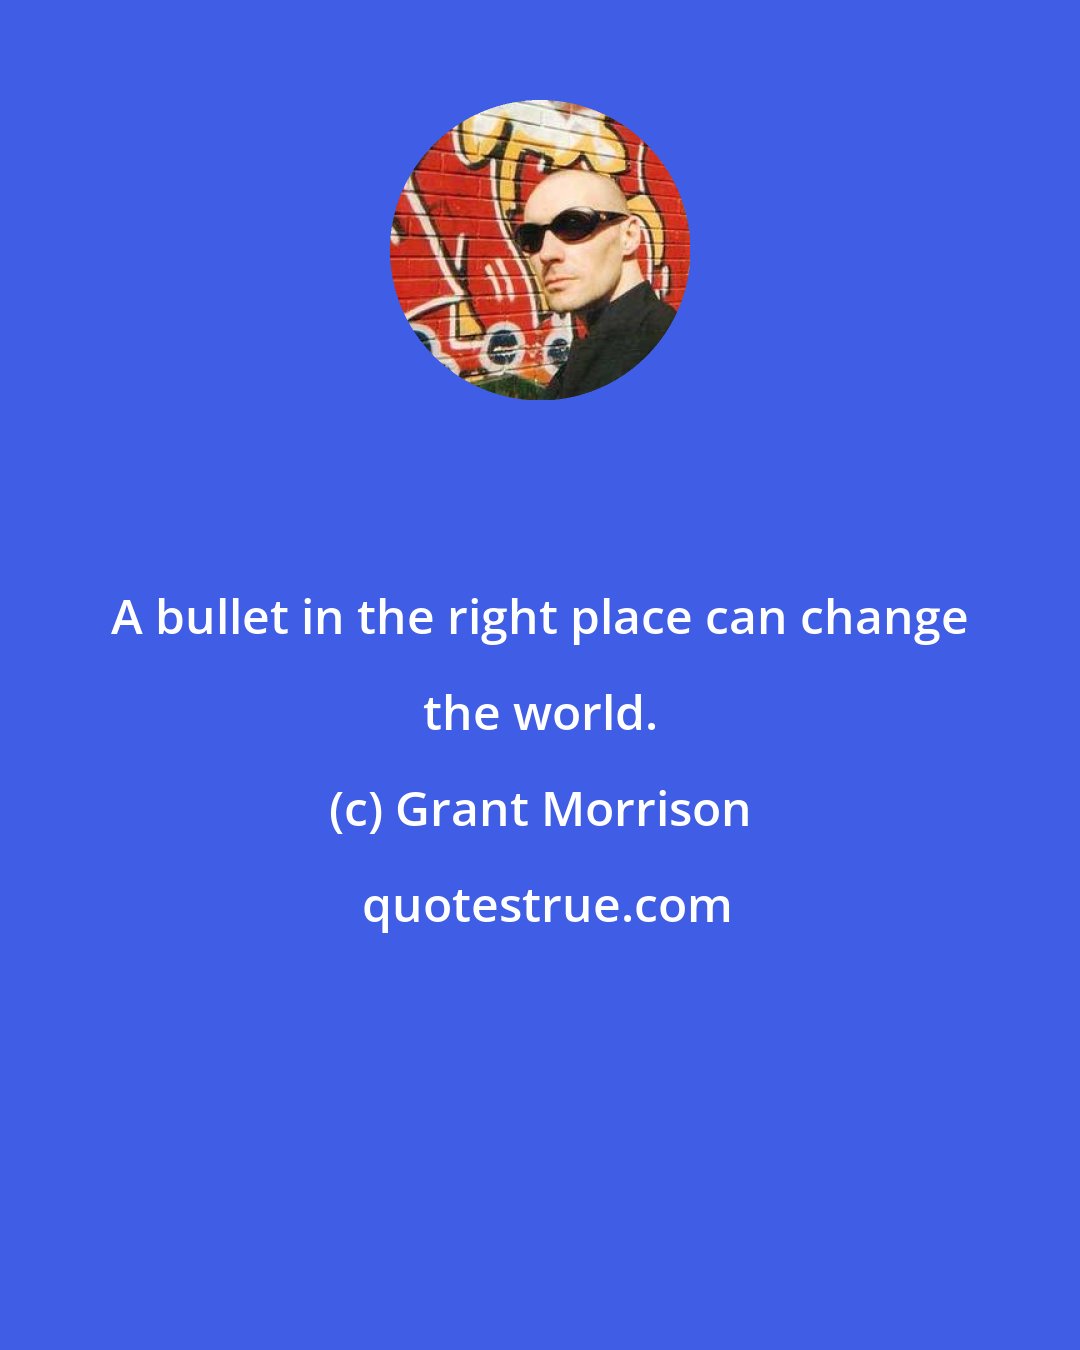 Grant Morrison: A bullet in the right place can change the world.